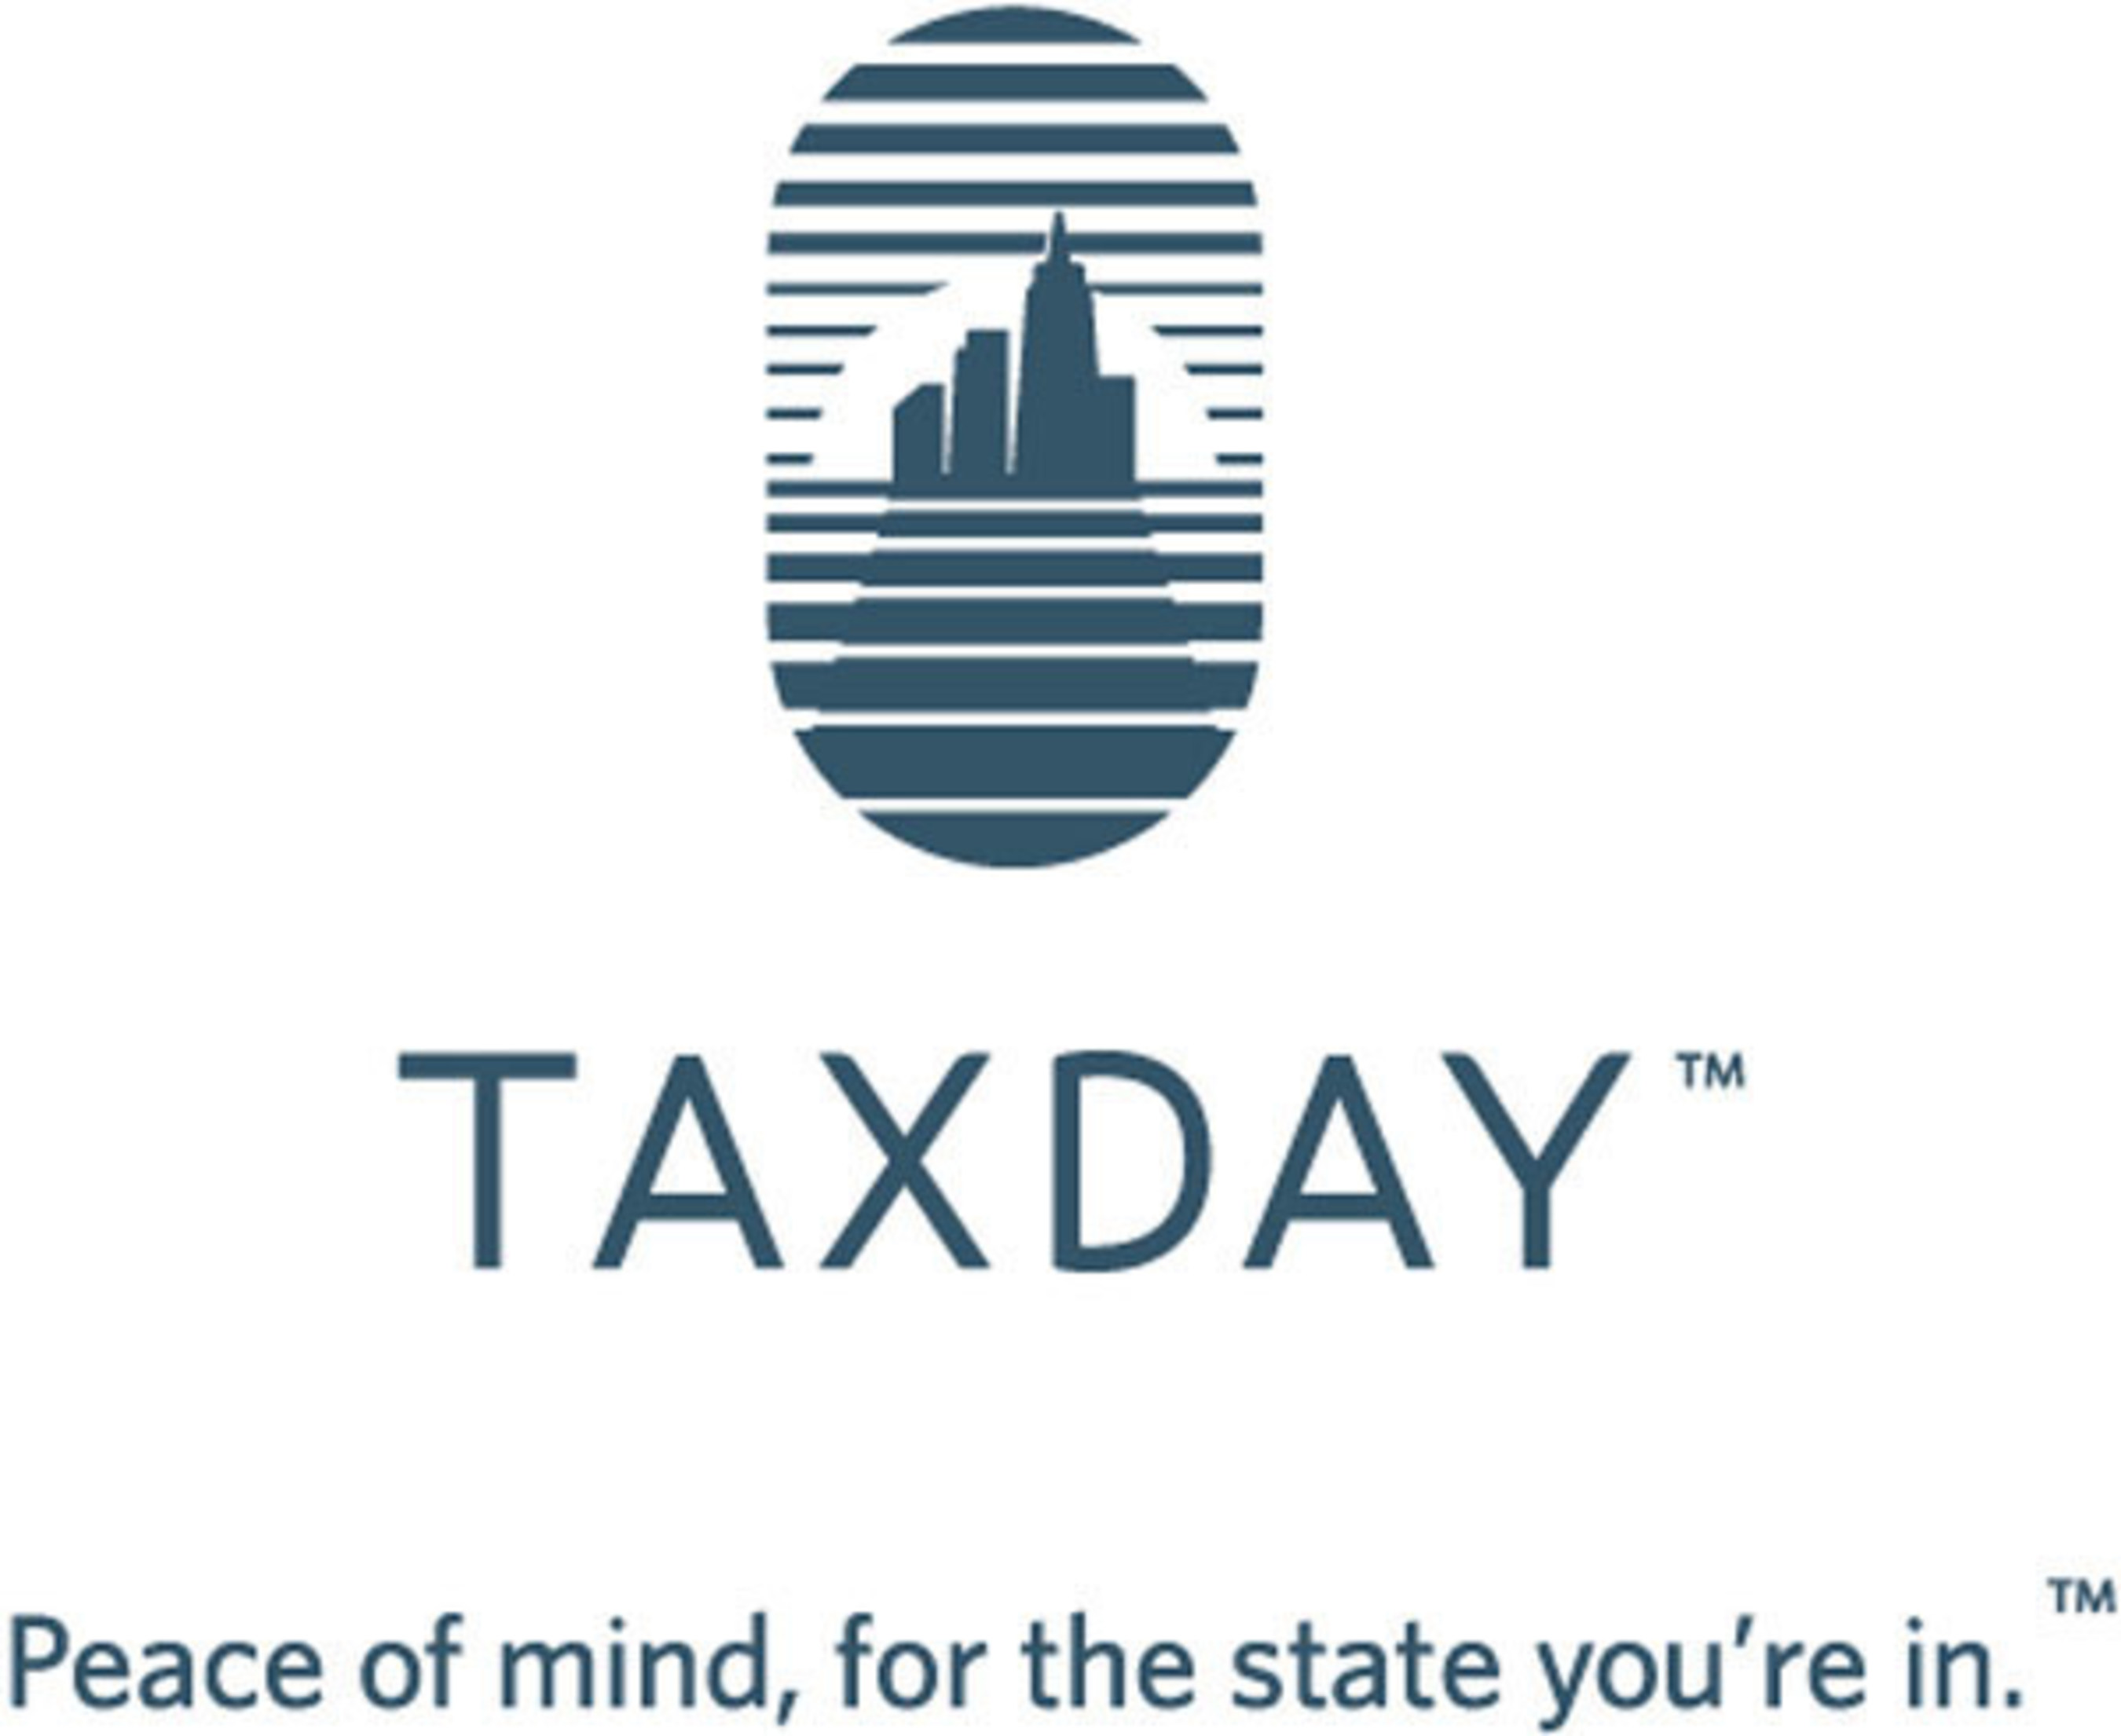 TaxDay(TM) is a travel-tracking app that enables individuals who maintain residences in more than one U.S. state, or travel frequently and do business in multiple states, to record their travel and track their tax-residency status requirements in a reliable, effortless way. By syncing TaxDay to GPS tracking on their mobile devices, users are able to reliably track their travel days and receive residency threshold notifications to avoid unintended consequences at tax time. The app can be synched across multiple devices and logins, so accountants, personal assistants and other parties can help busy travelers maintain accurate travel records.